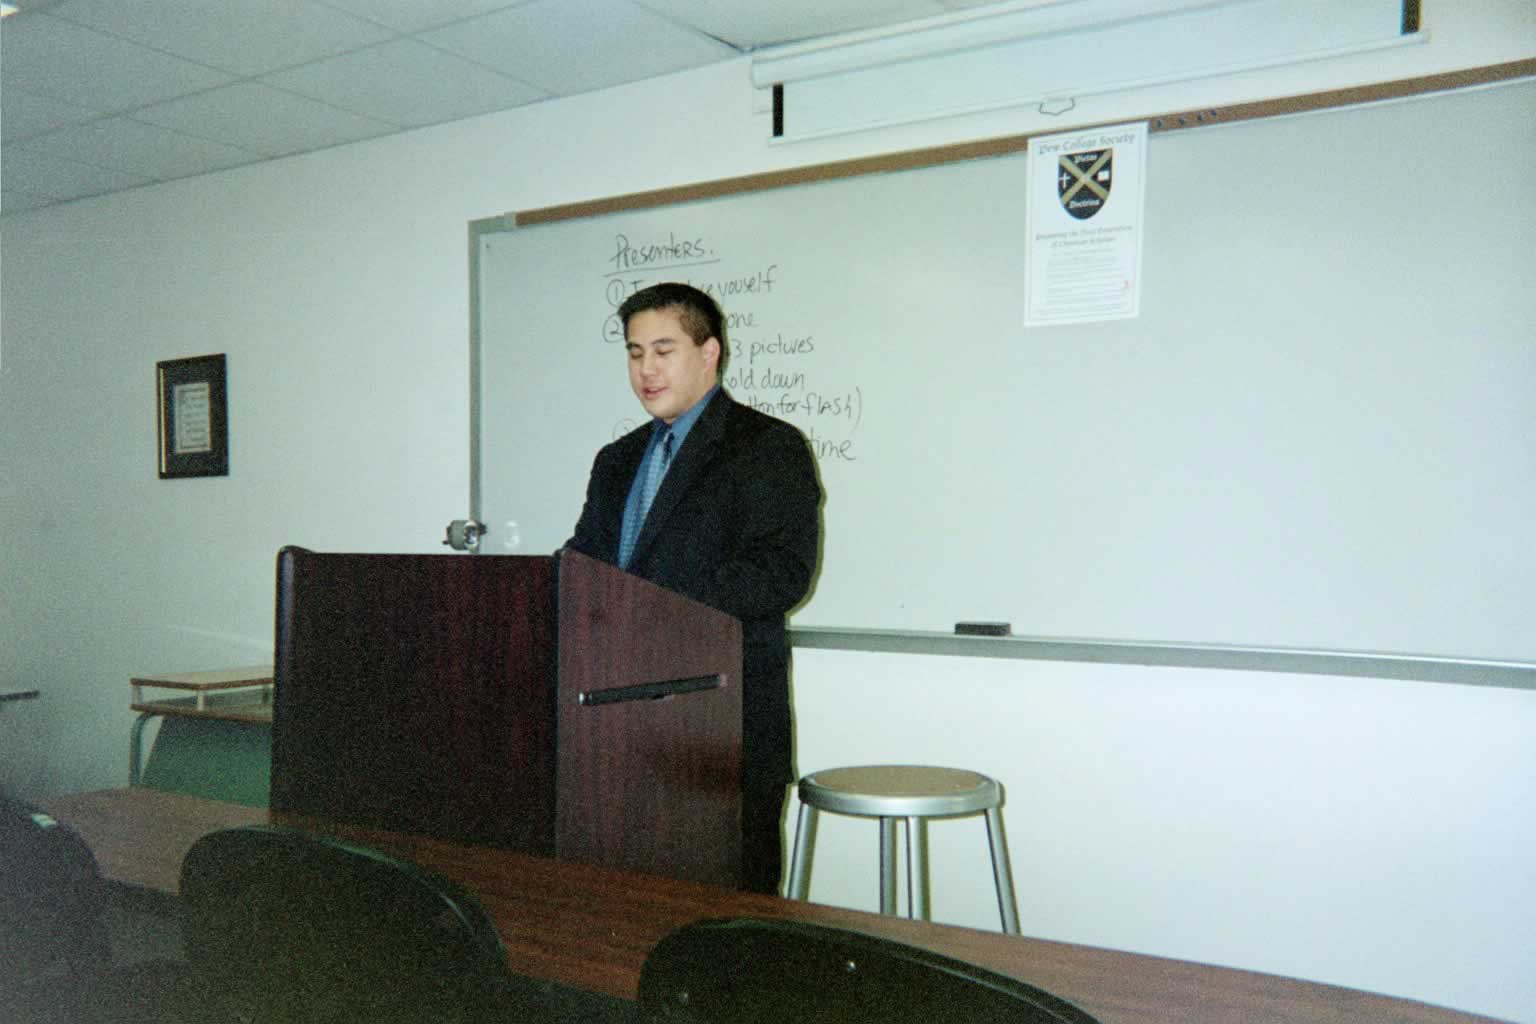 picture of a man in a suit standing behind a podium speaking